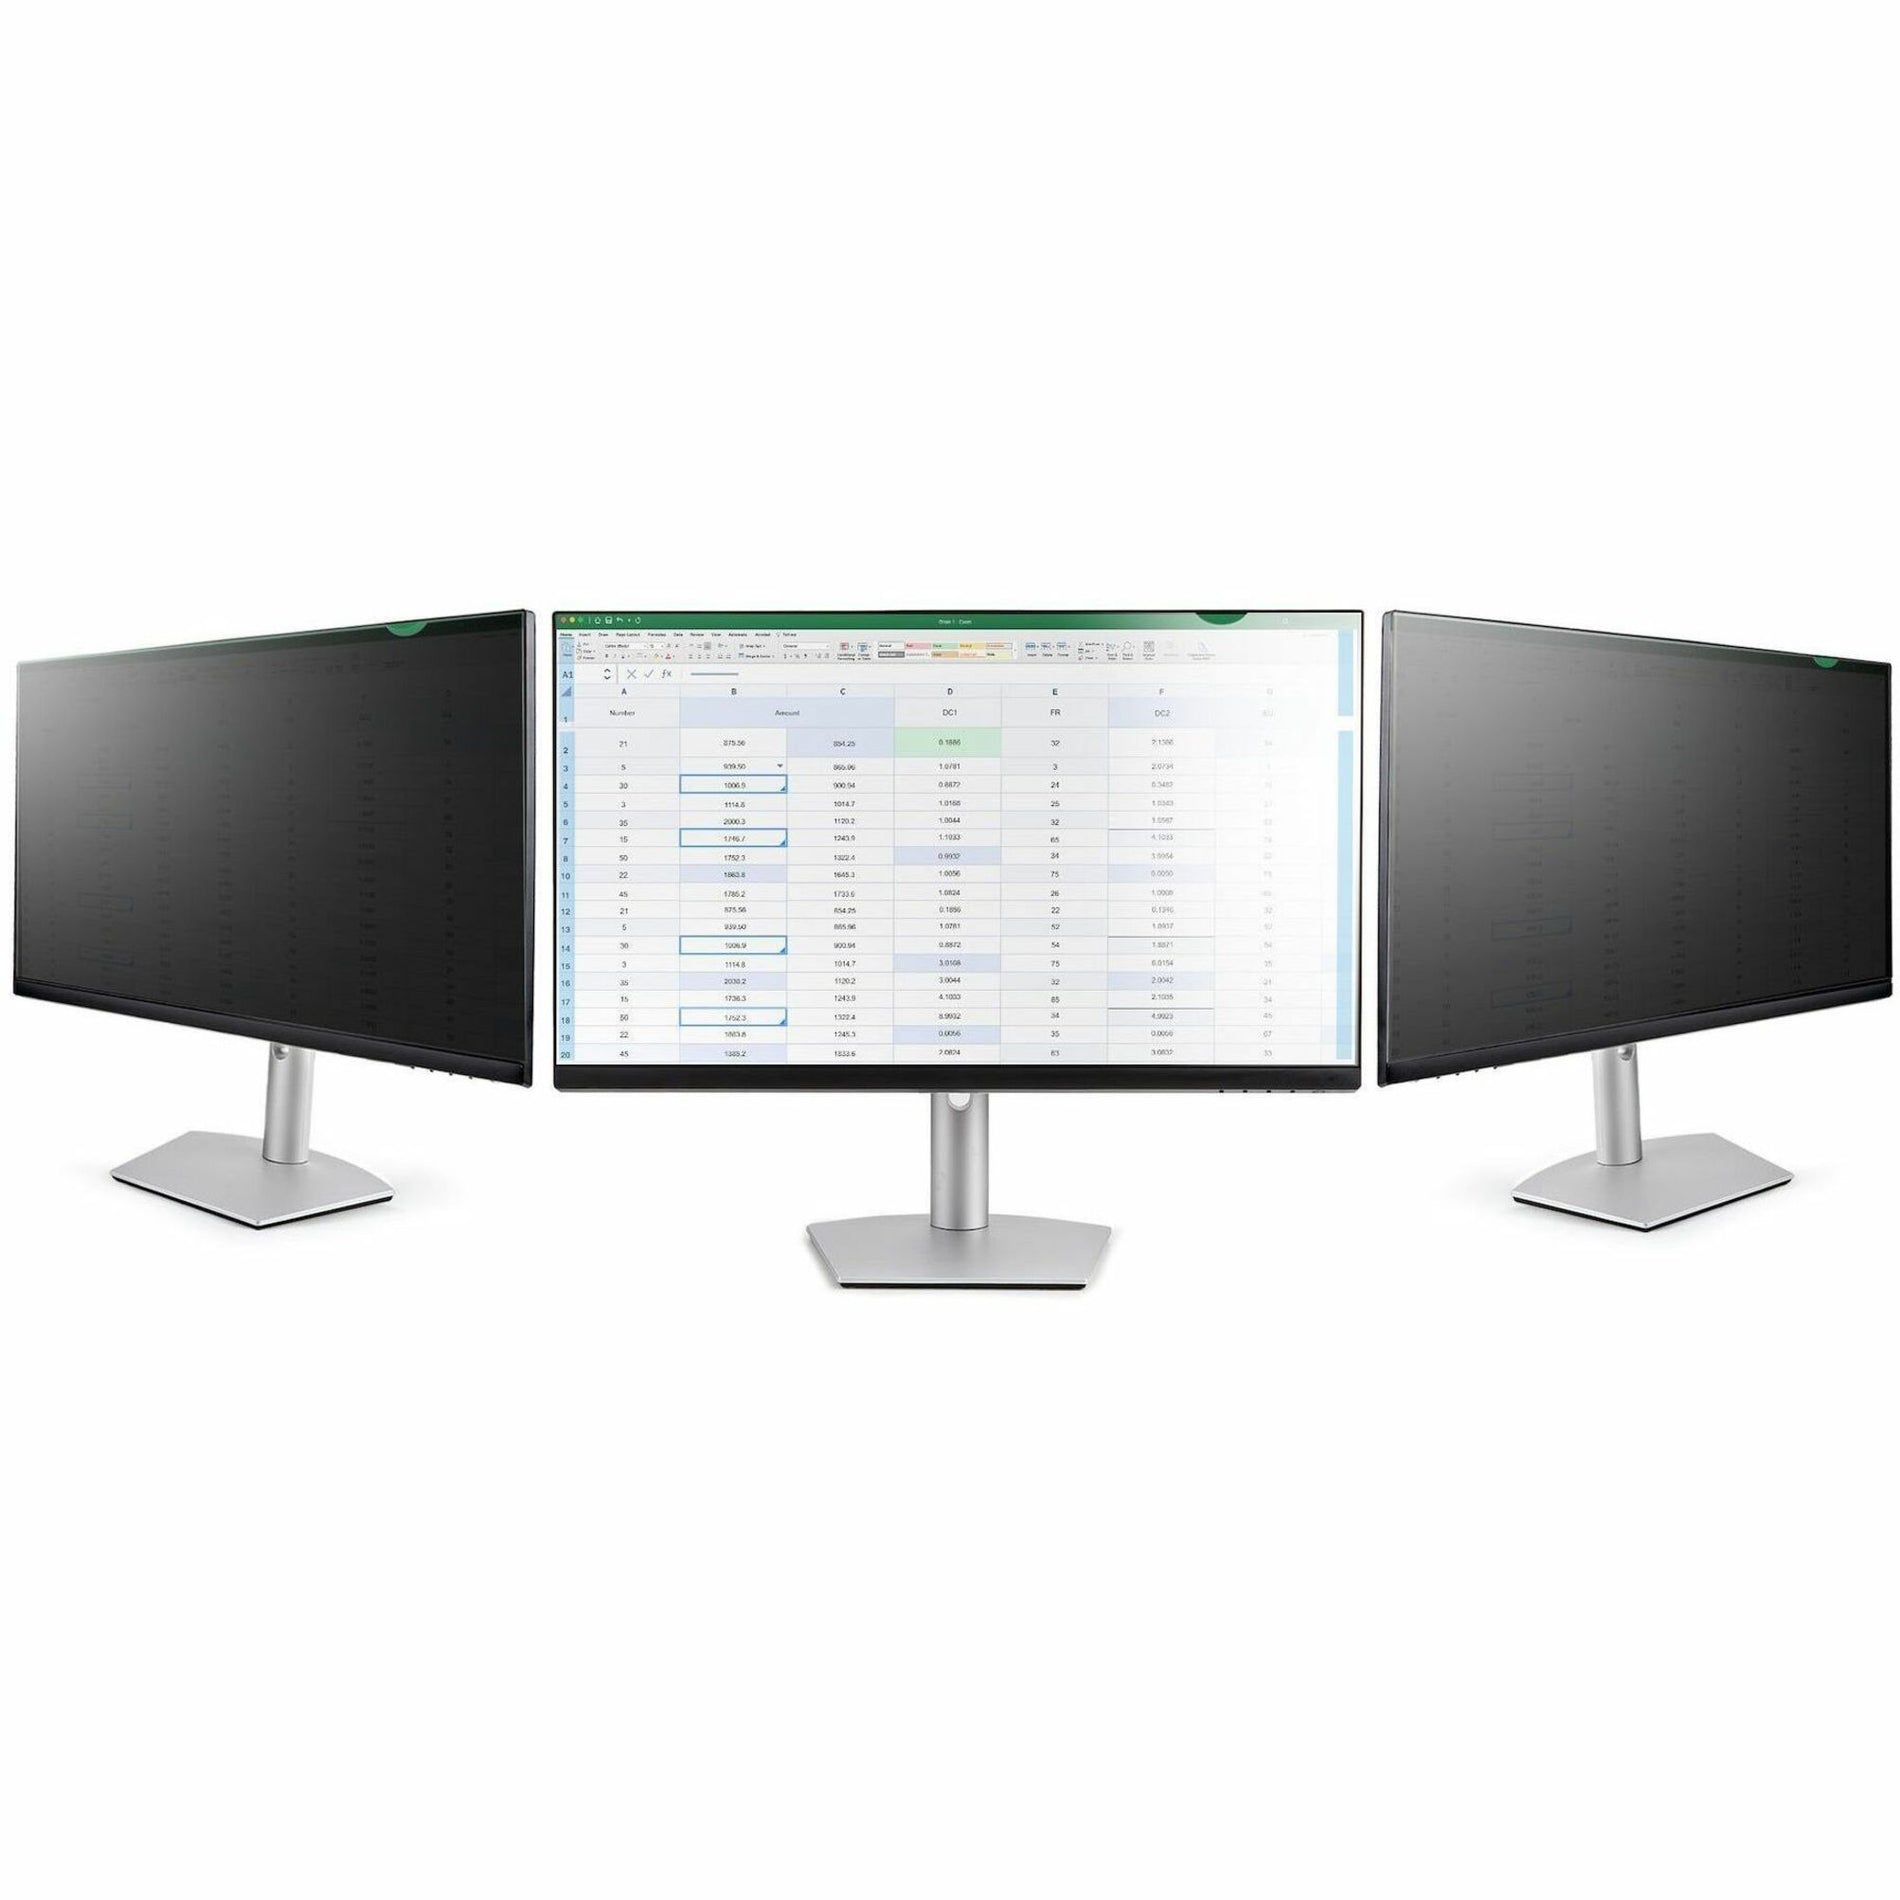 StarTech.com 2269-PRIVACY-SCREEN Privacy Screen Filter, Blue Light Reduction, Reversible, Residue-free, Anti-glare, 16:9, 22" LCD Monitor